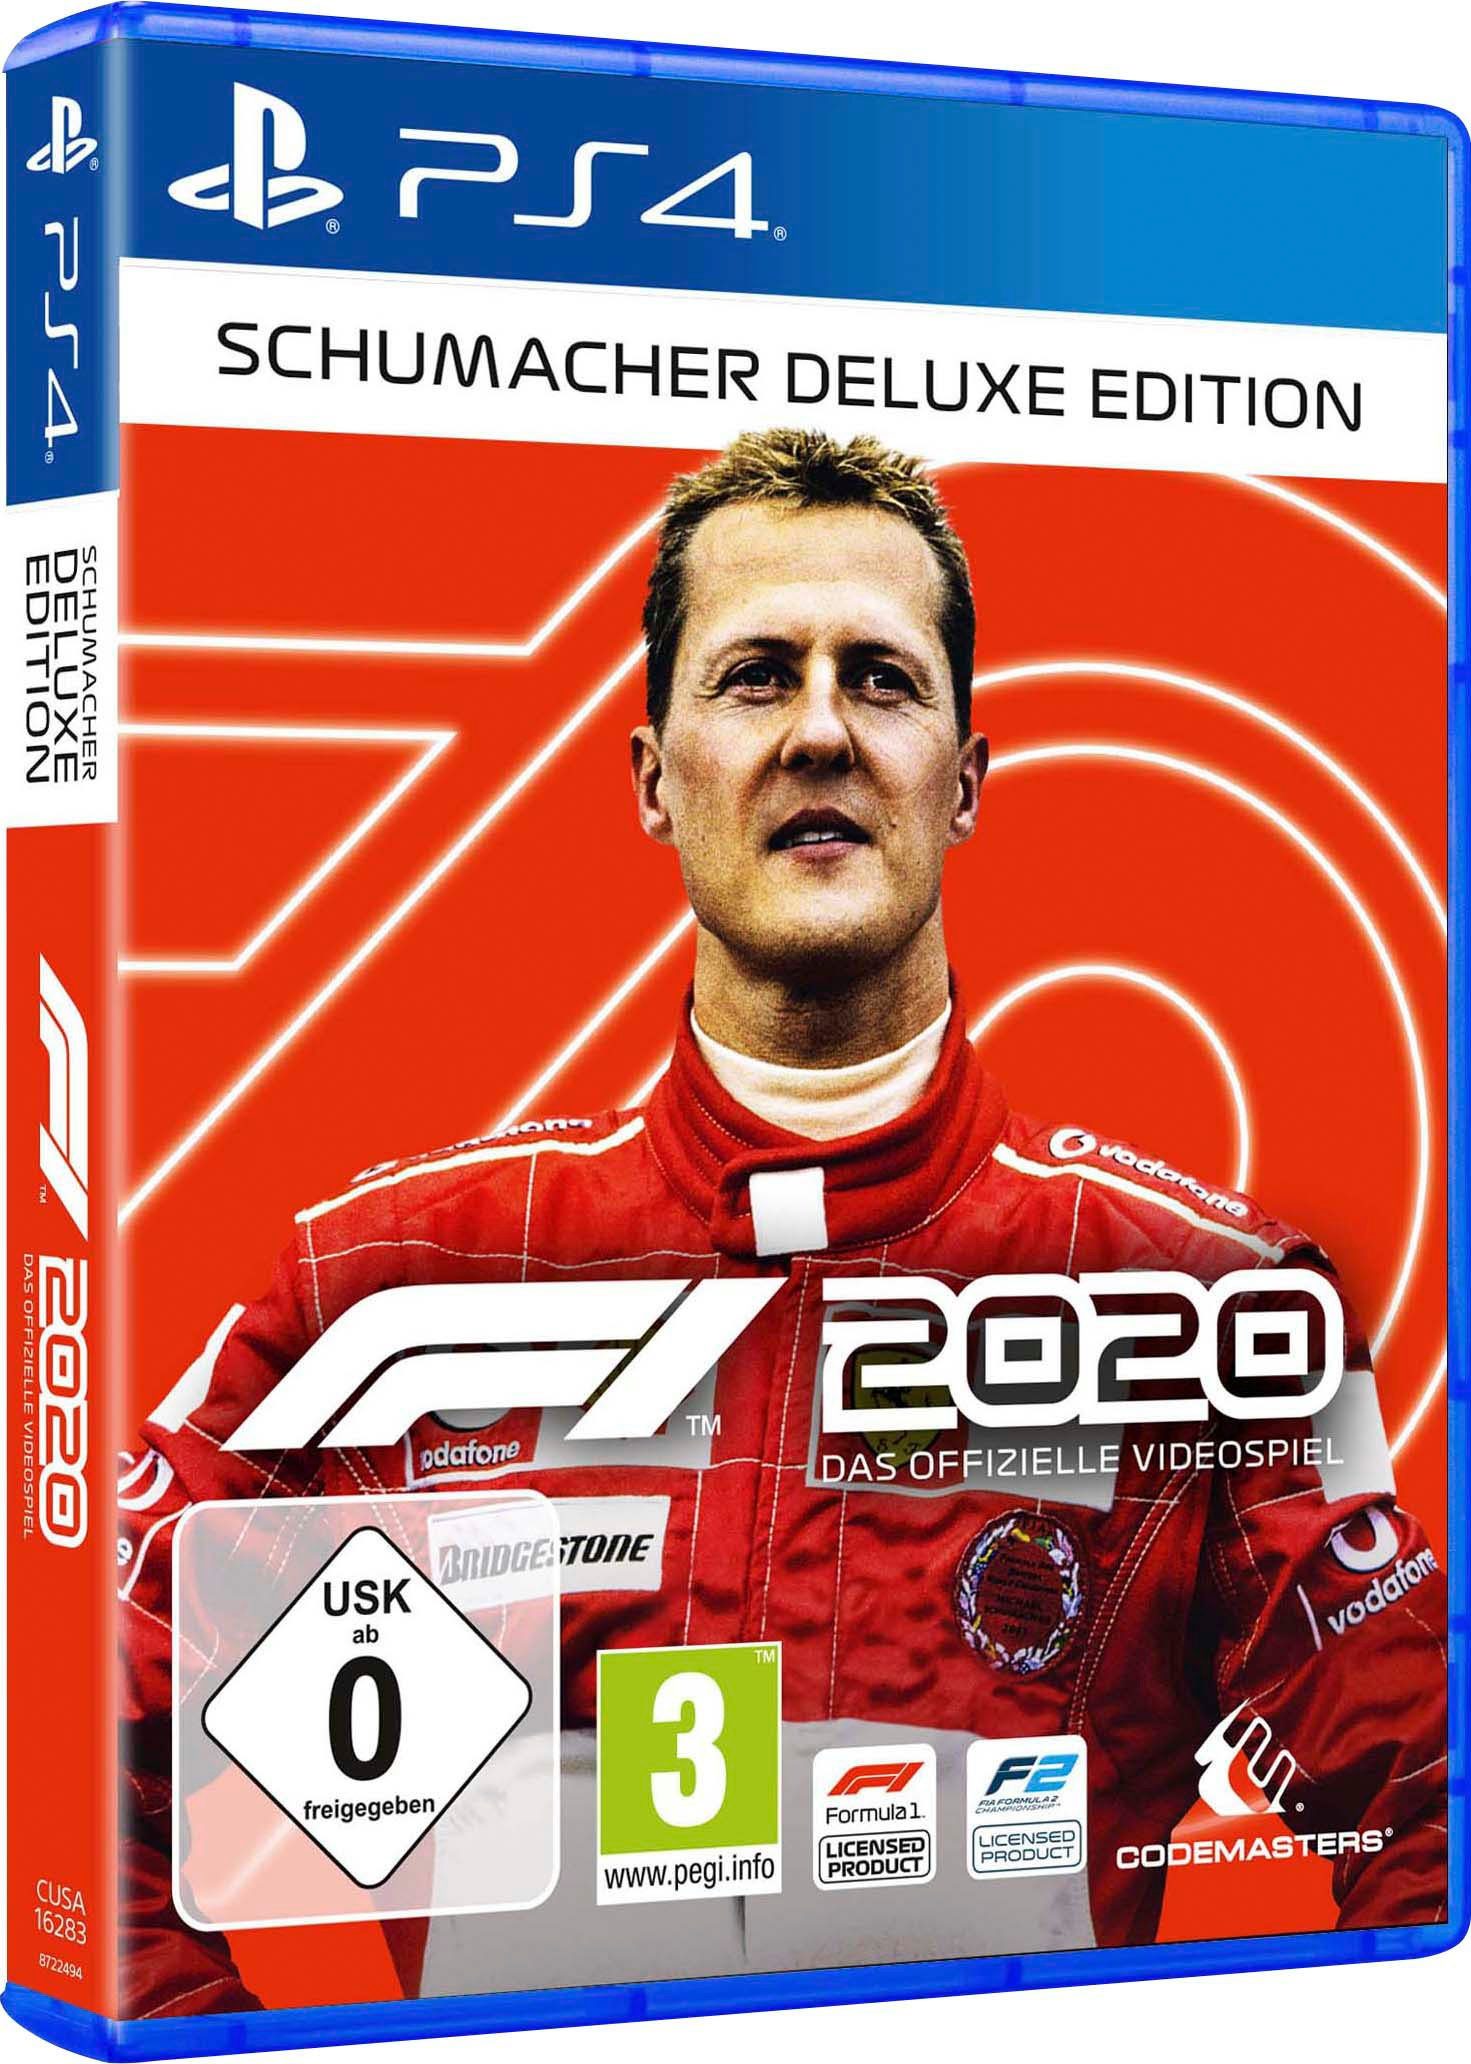 F1 2020 Schumacher Deluxe Edition PlayStation 4